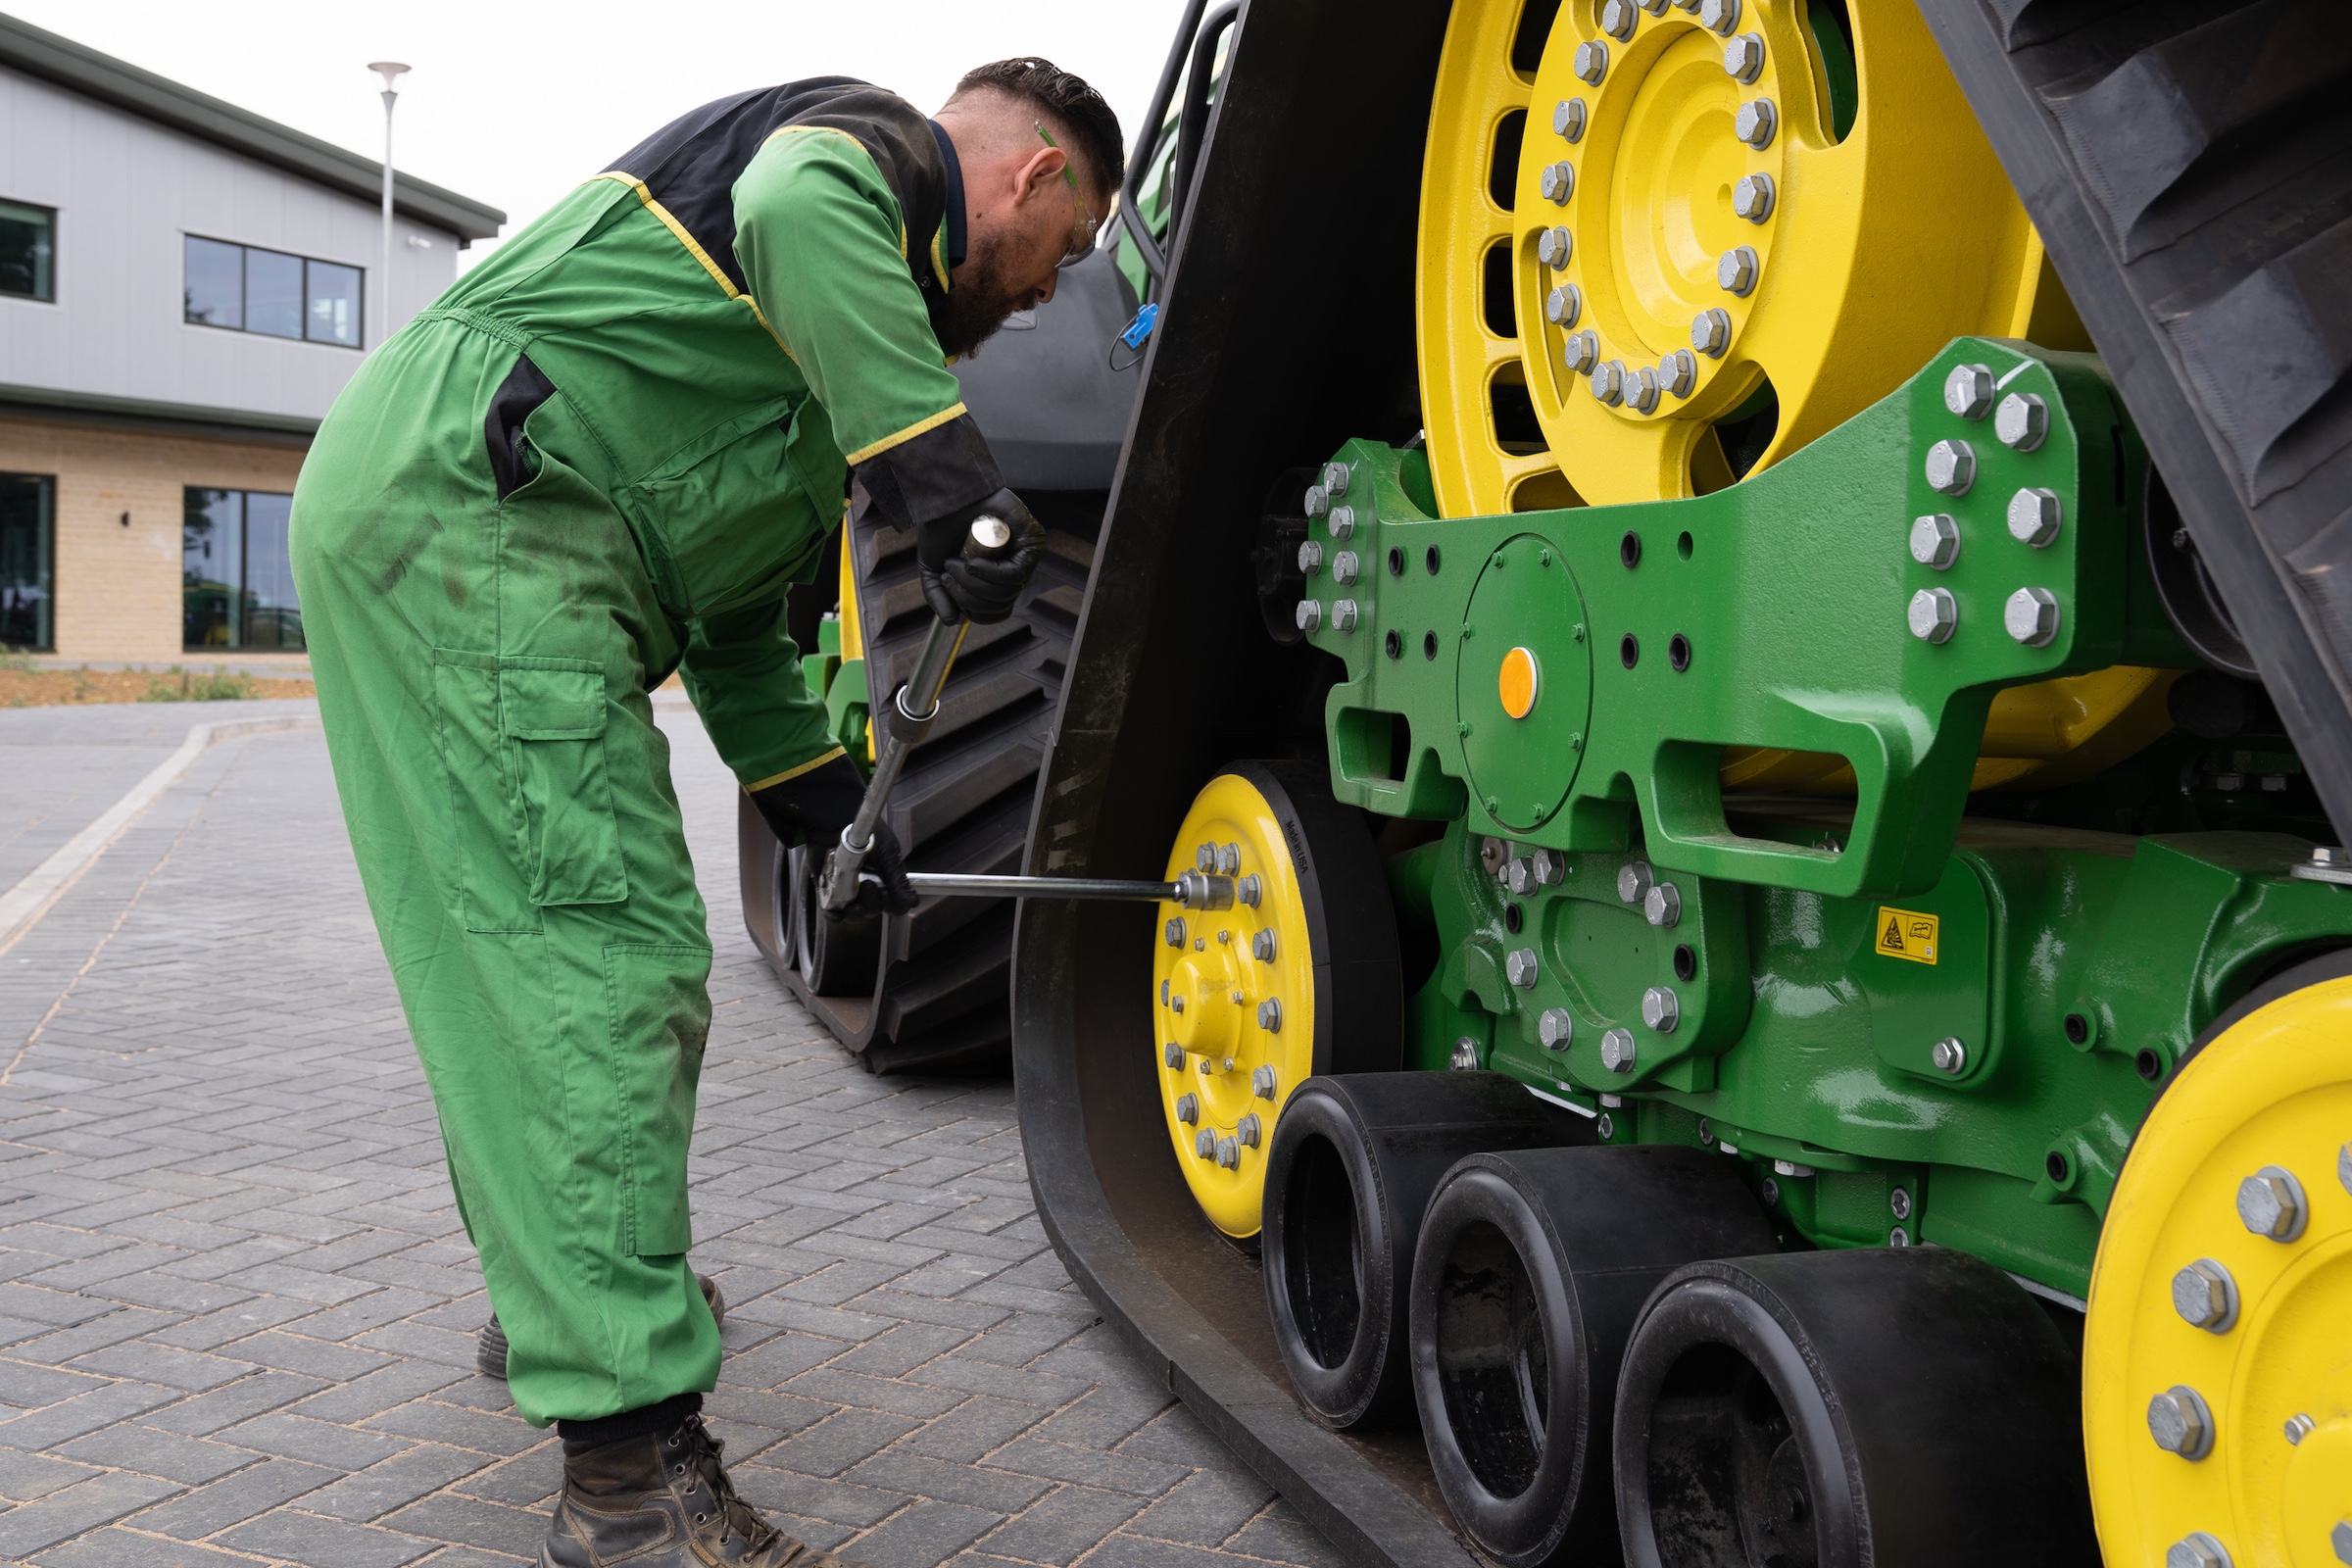 Ex-service personnel offered new careers as John Deere machinery technicians